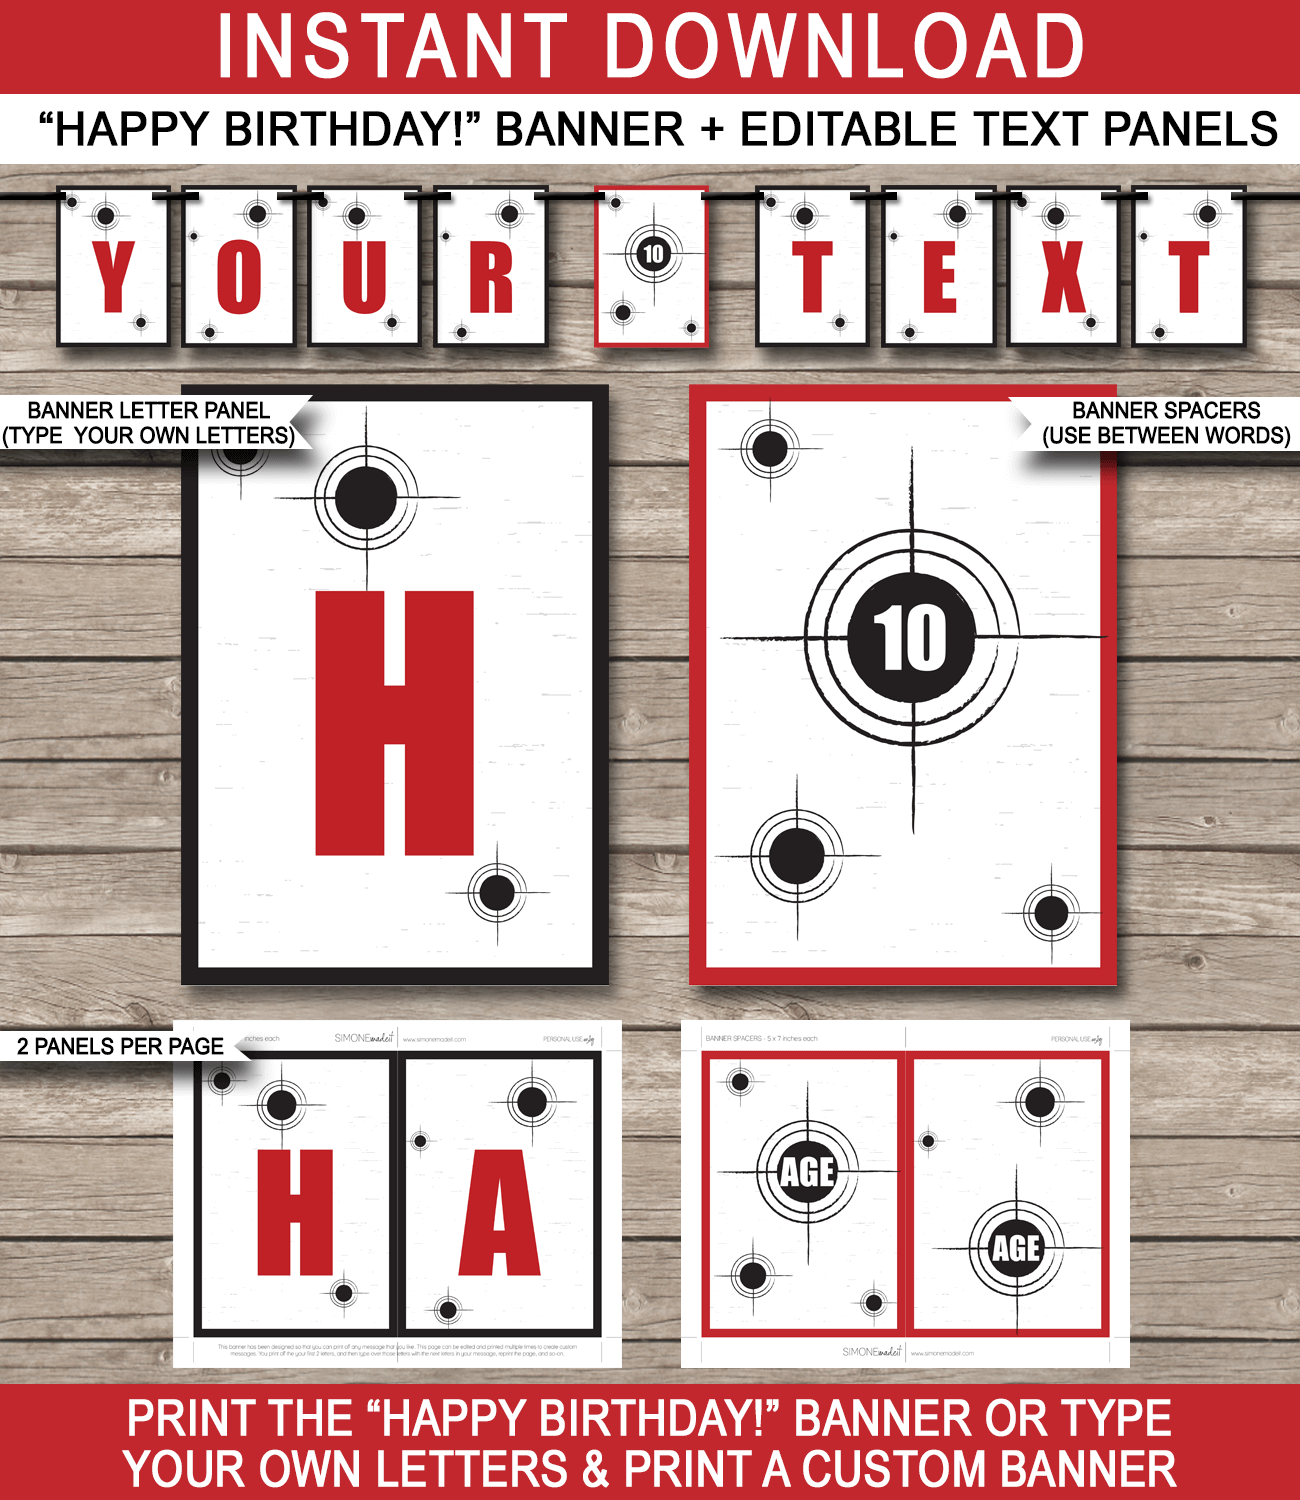 Laser Tag Party Banner Template - Laser Tag Bunting - Happy Birthday Banner - Birthday Party - Red and Black - Editable and Printable DIY Template - INSTANT DOWNLOAD $4.50 via simonemadeit.com